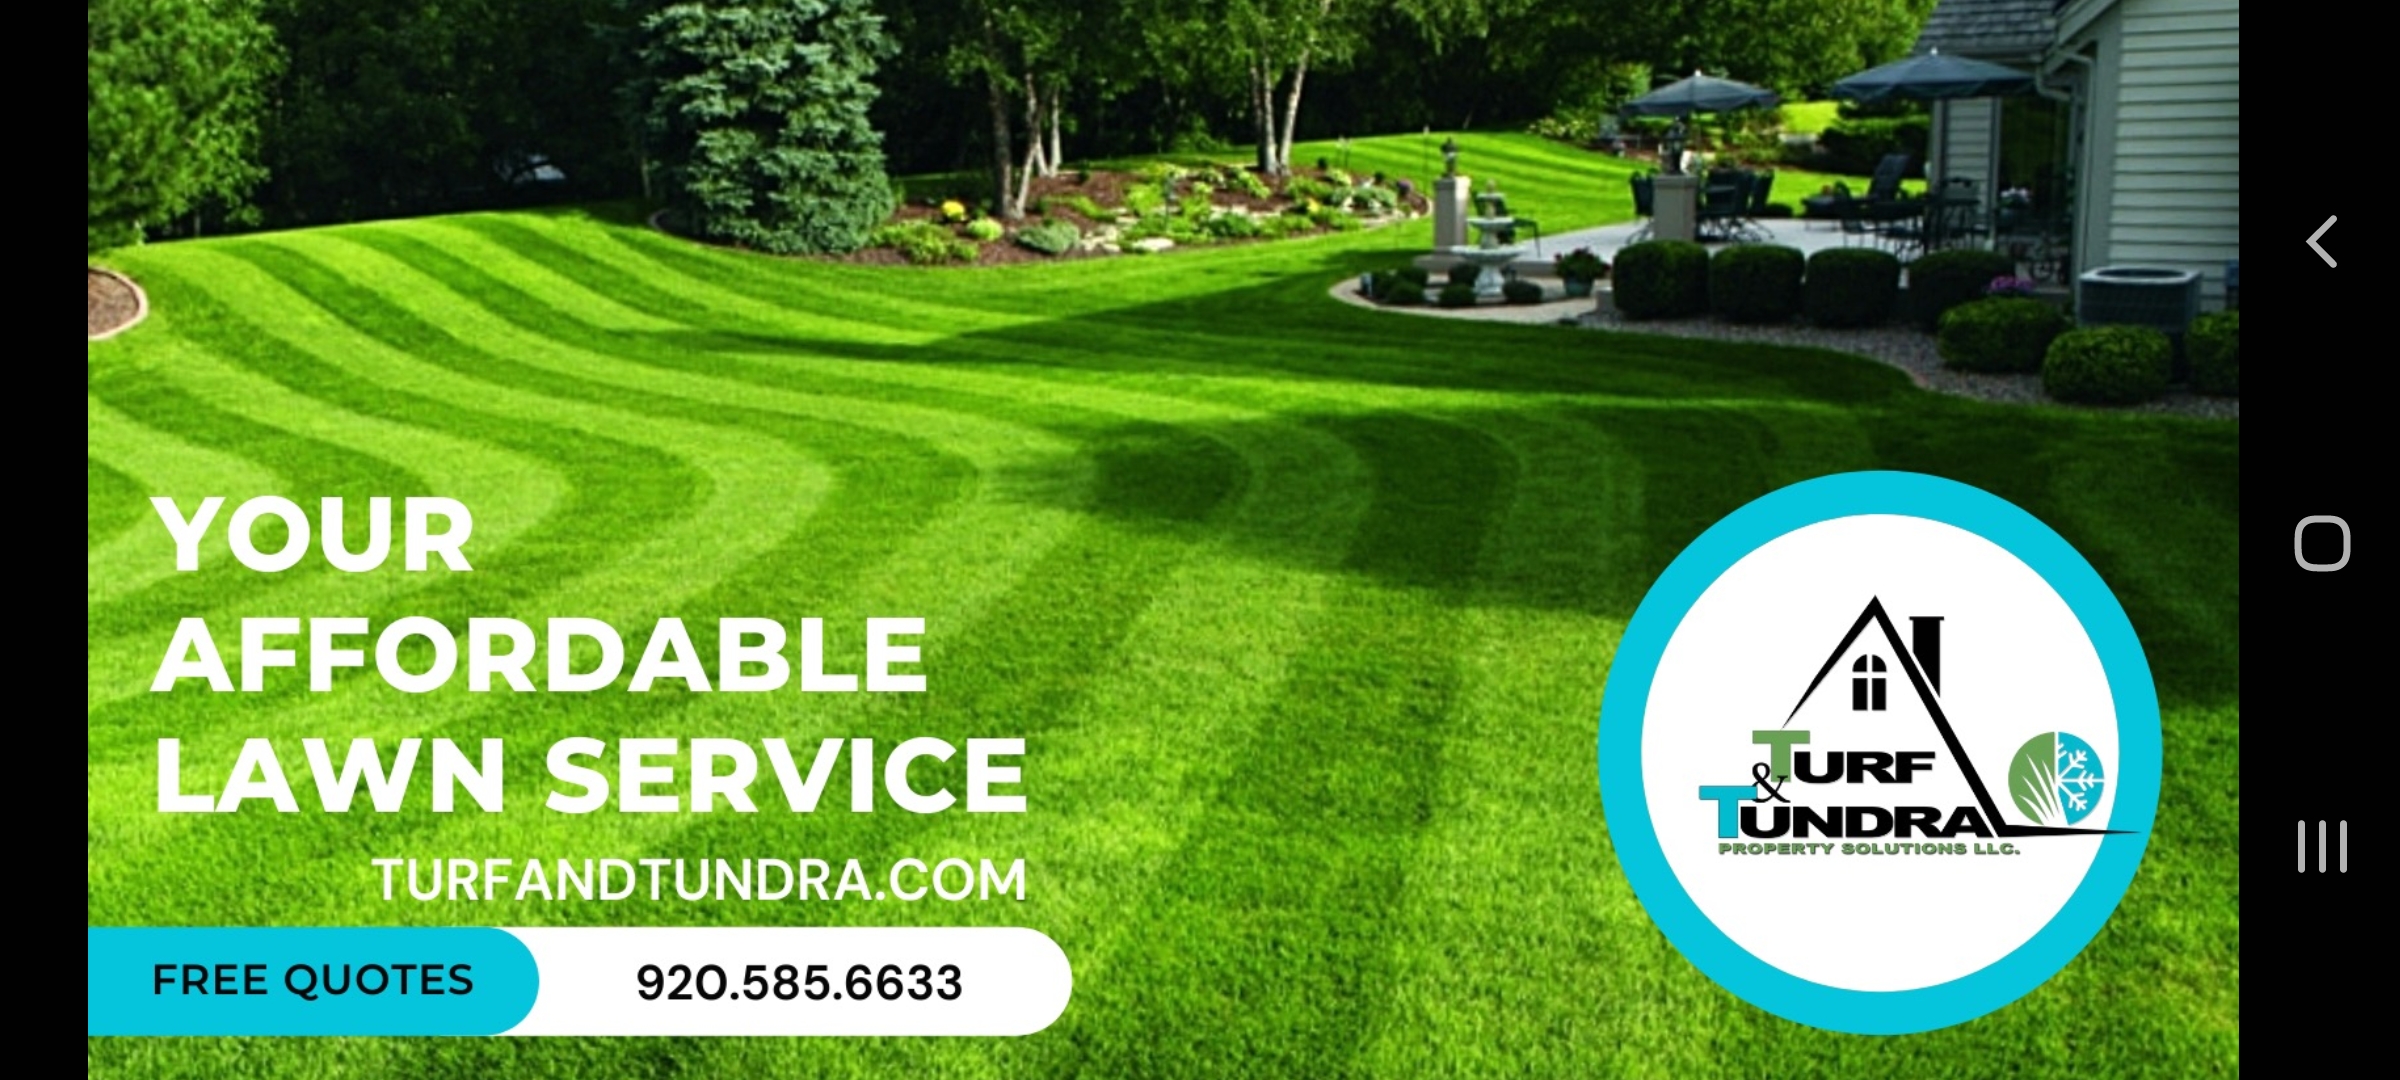 Turf And Tundra Property Solutions Logo